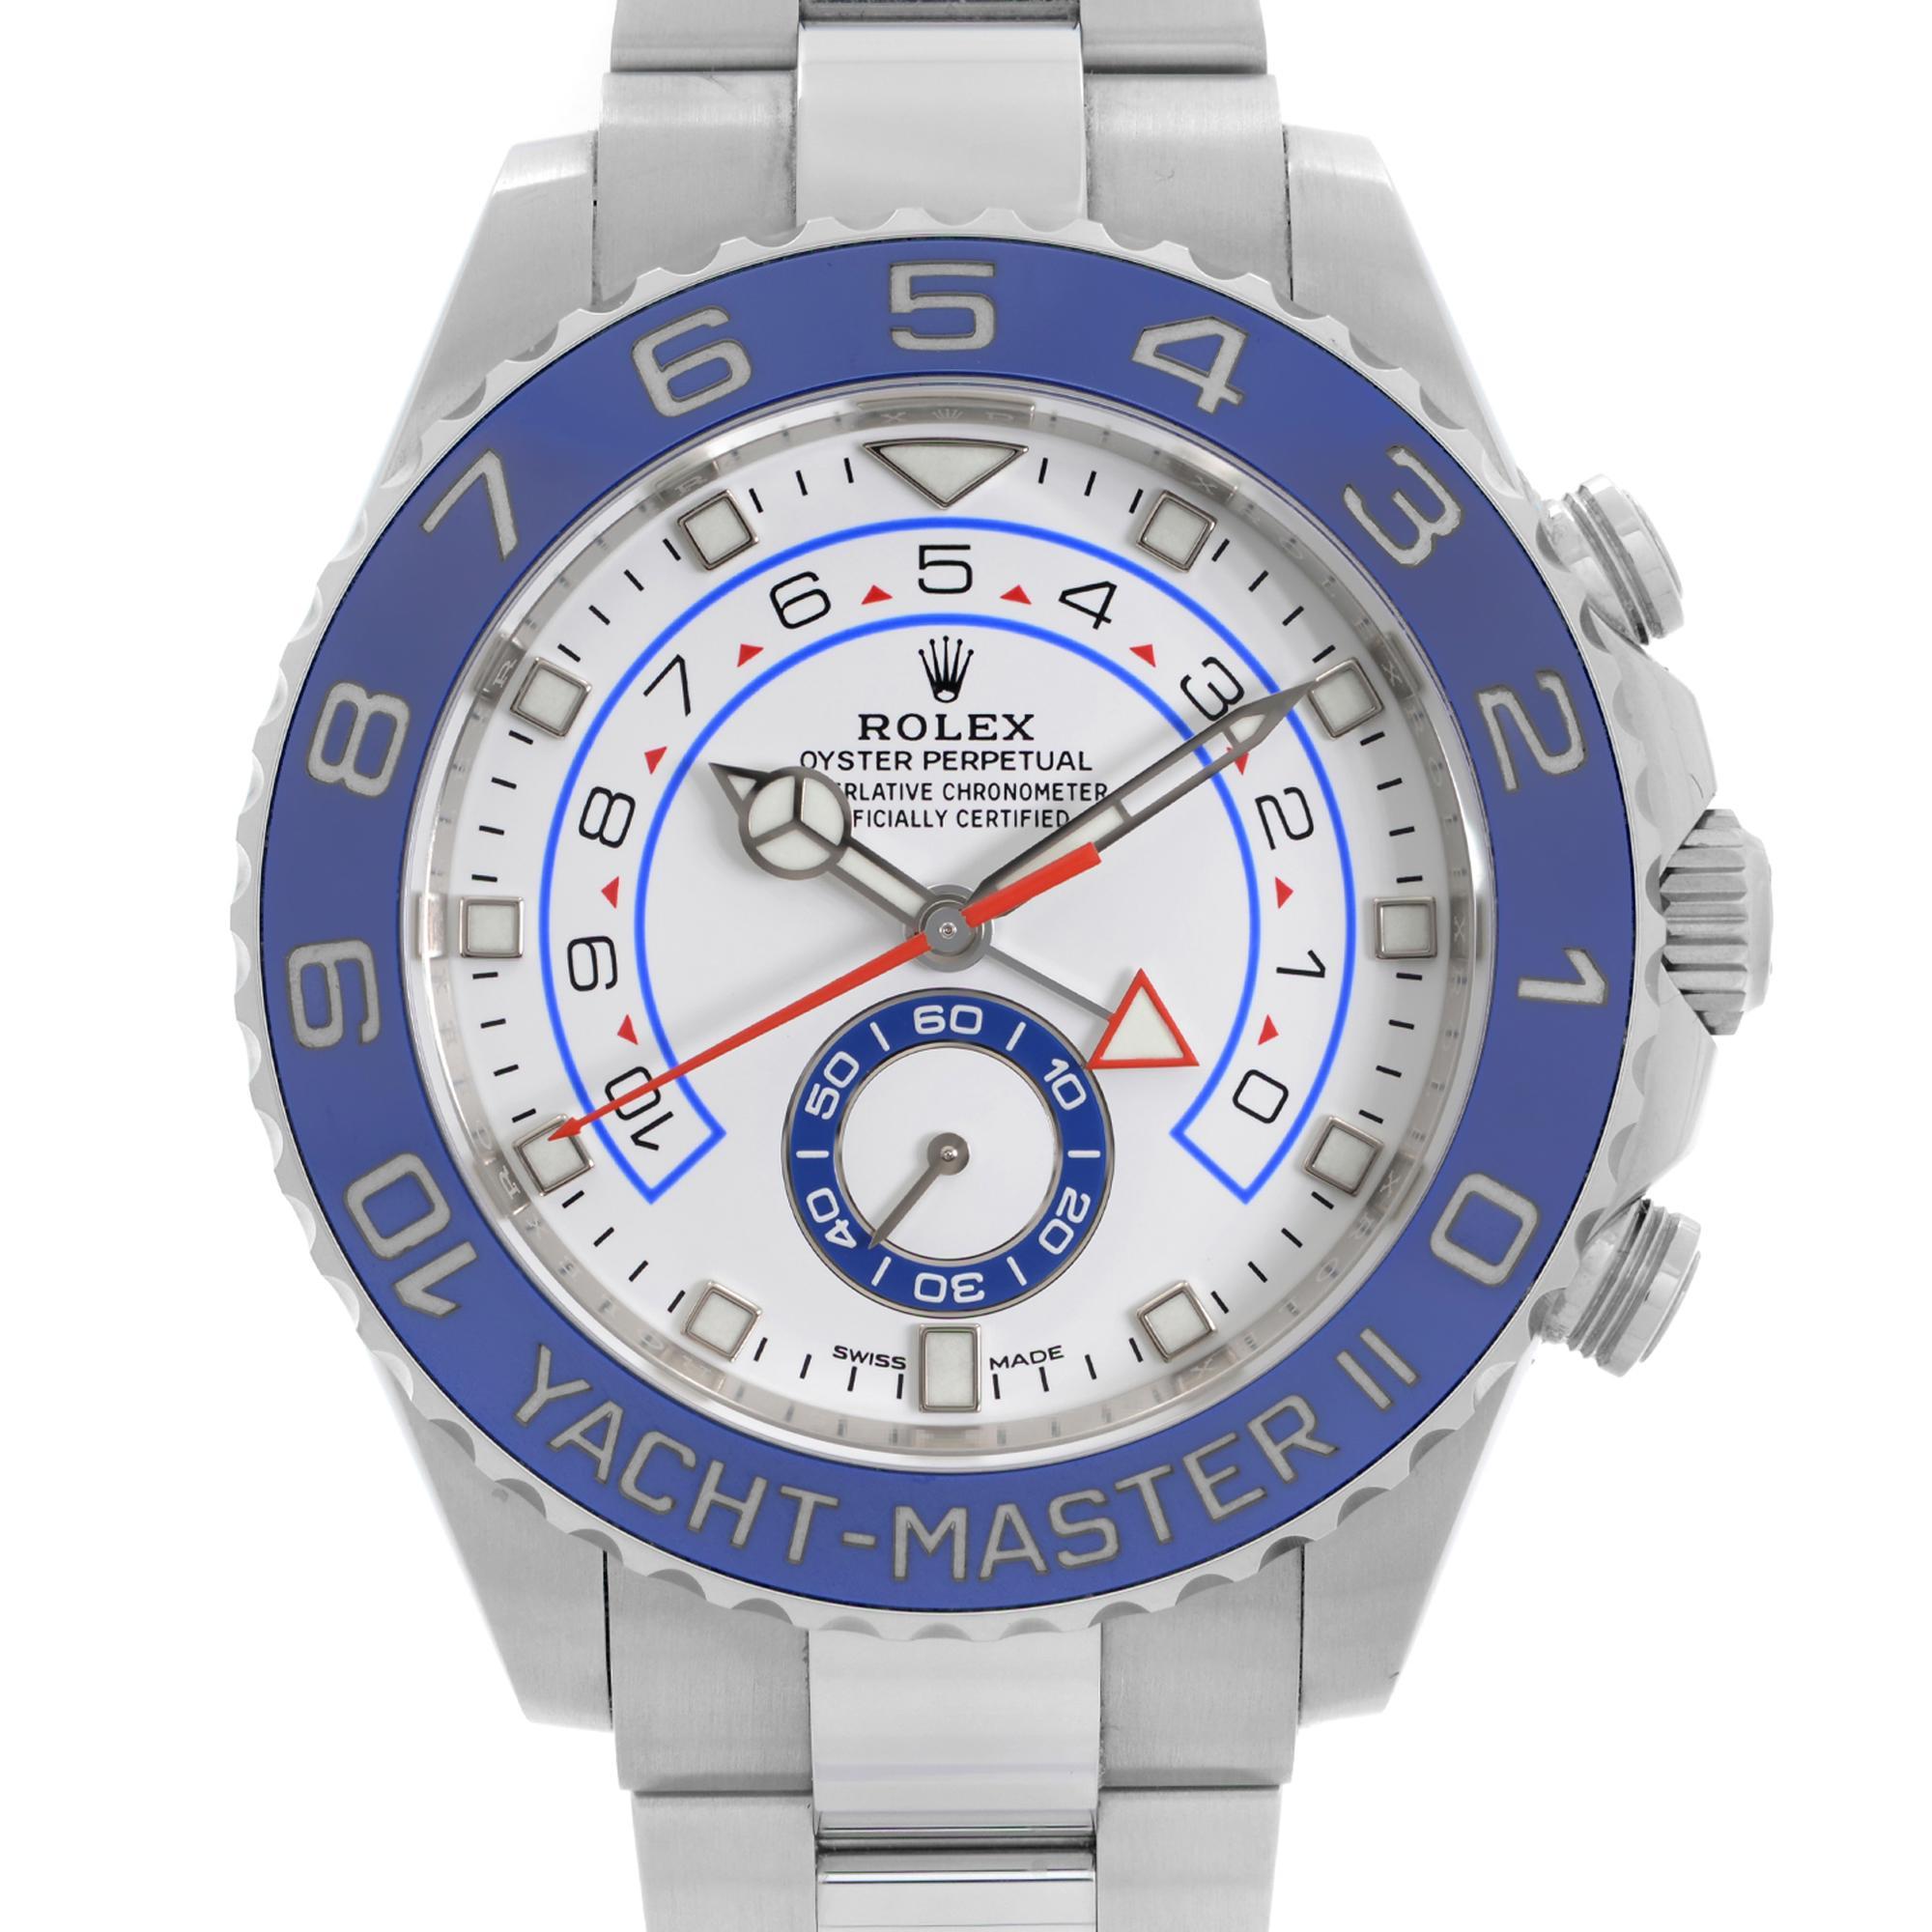 44mm yachtmaster